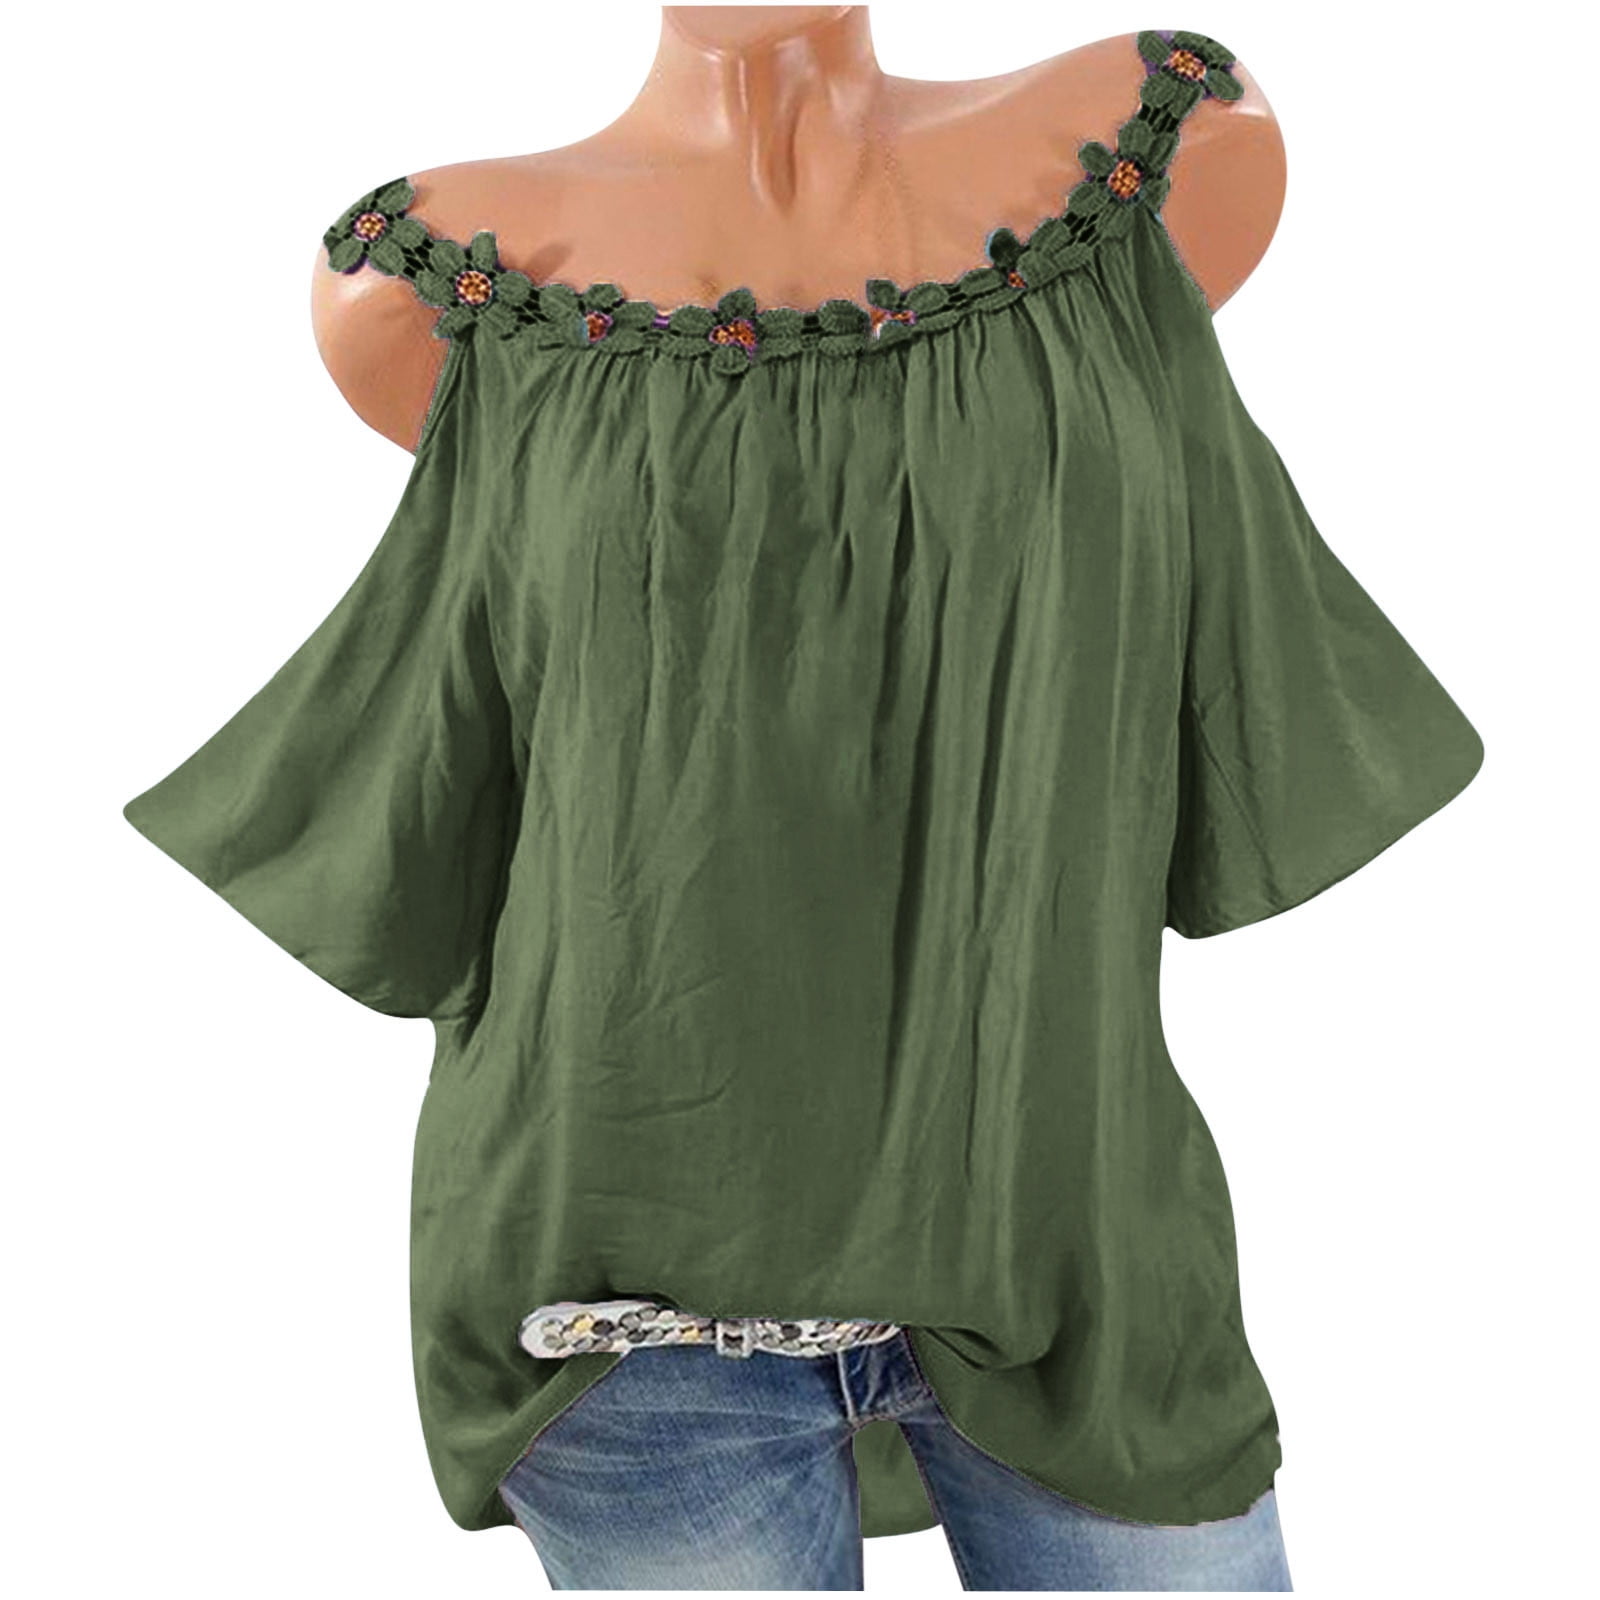 Juebong Blouses for Womens Floral Boho Summer Tops Loose Plus Size ...